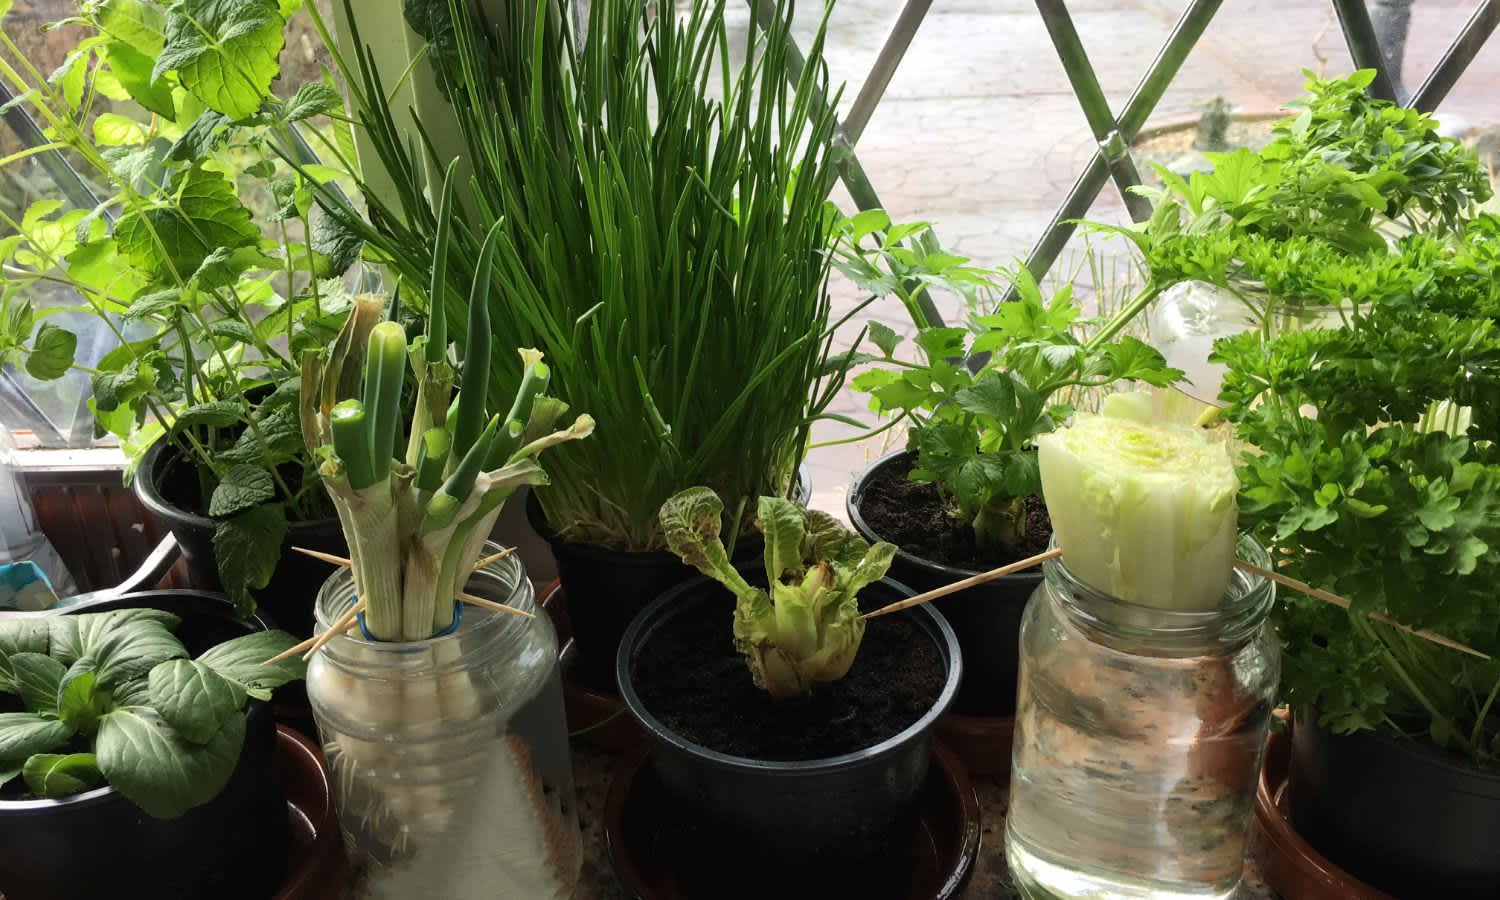 Spring onions regrowing